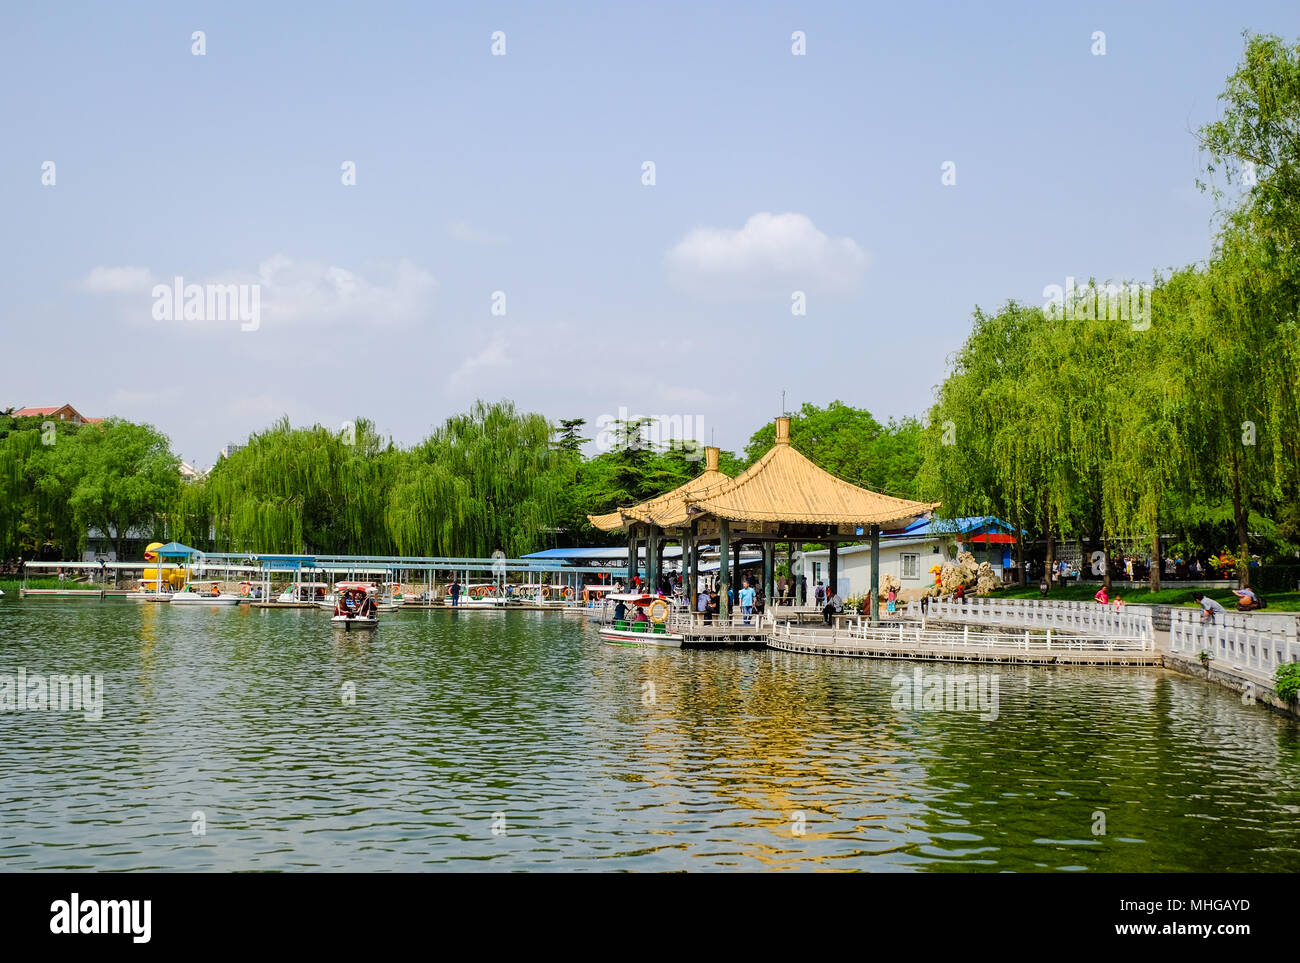 BEIJING, CHINA - APRIL 30, 2018: People are taking a recreational boat ride in a park. Taoranting Park is a major city park located in Xicheng Distric Stock Photo